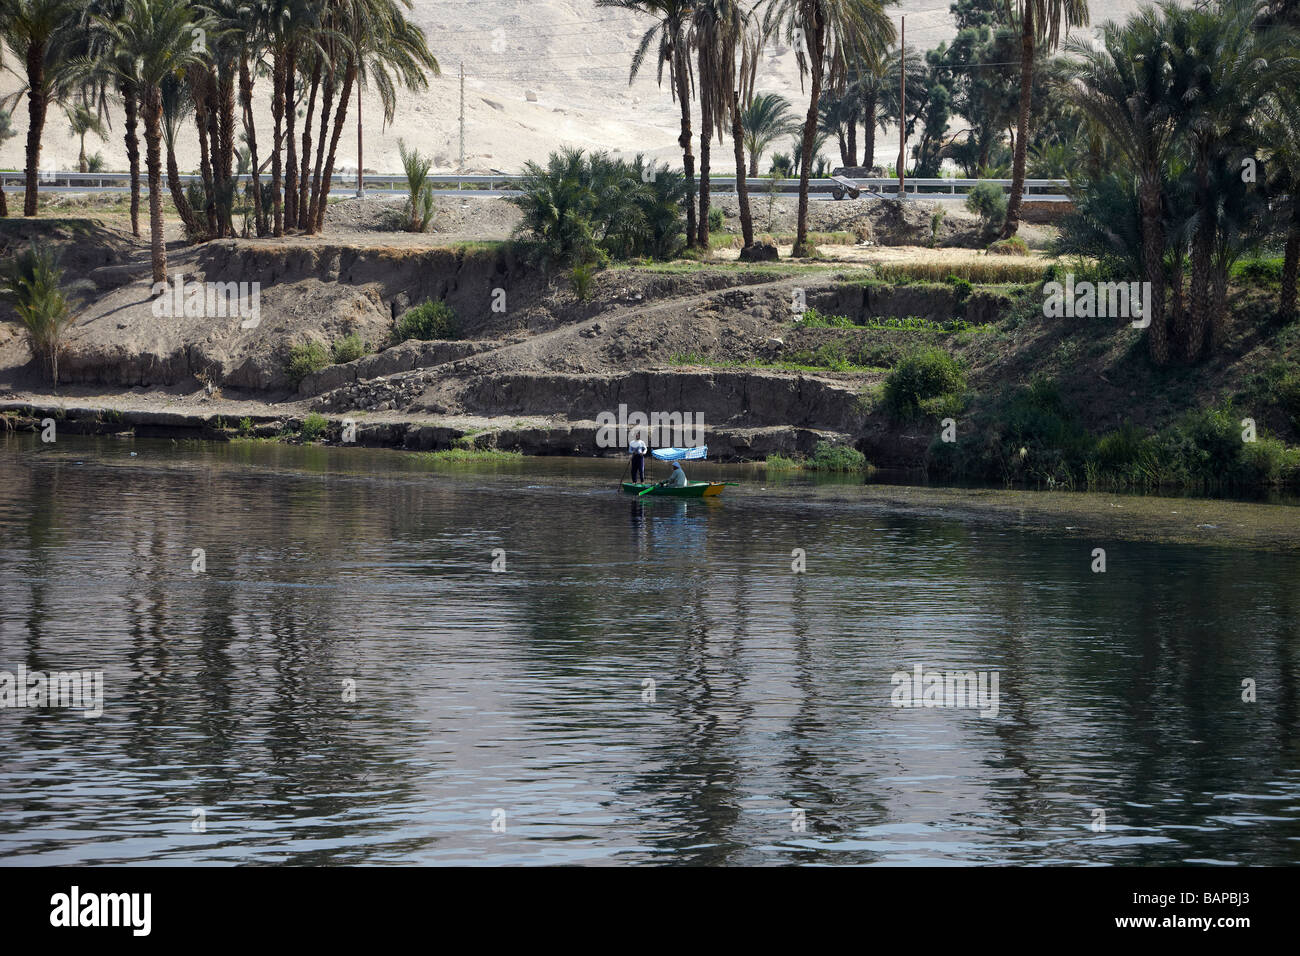 Banks of the River Nile, Luxor, Egypt Stock Photo